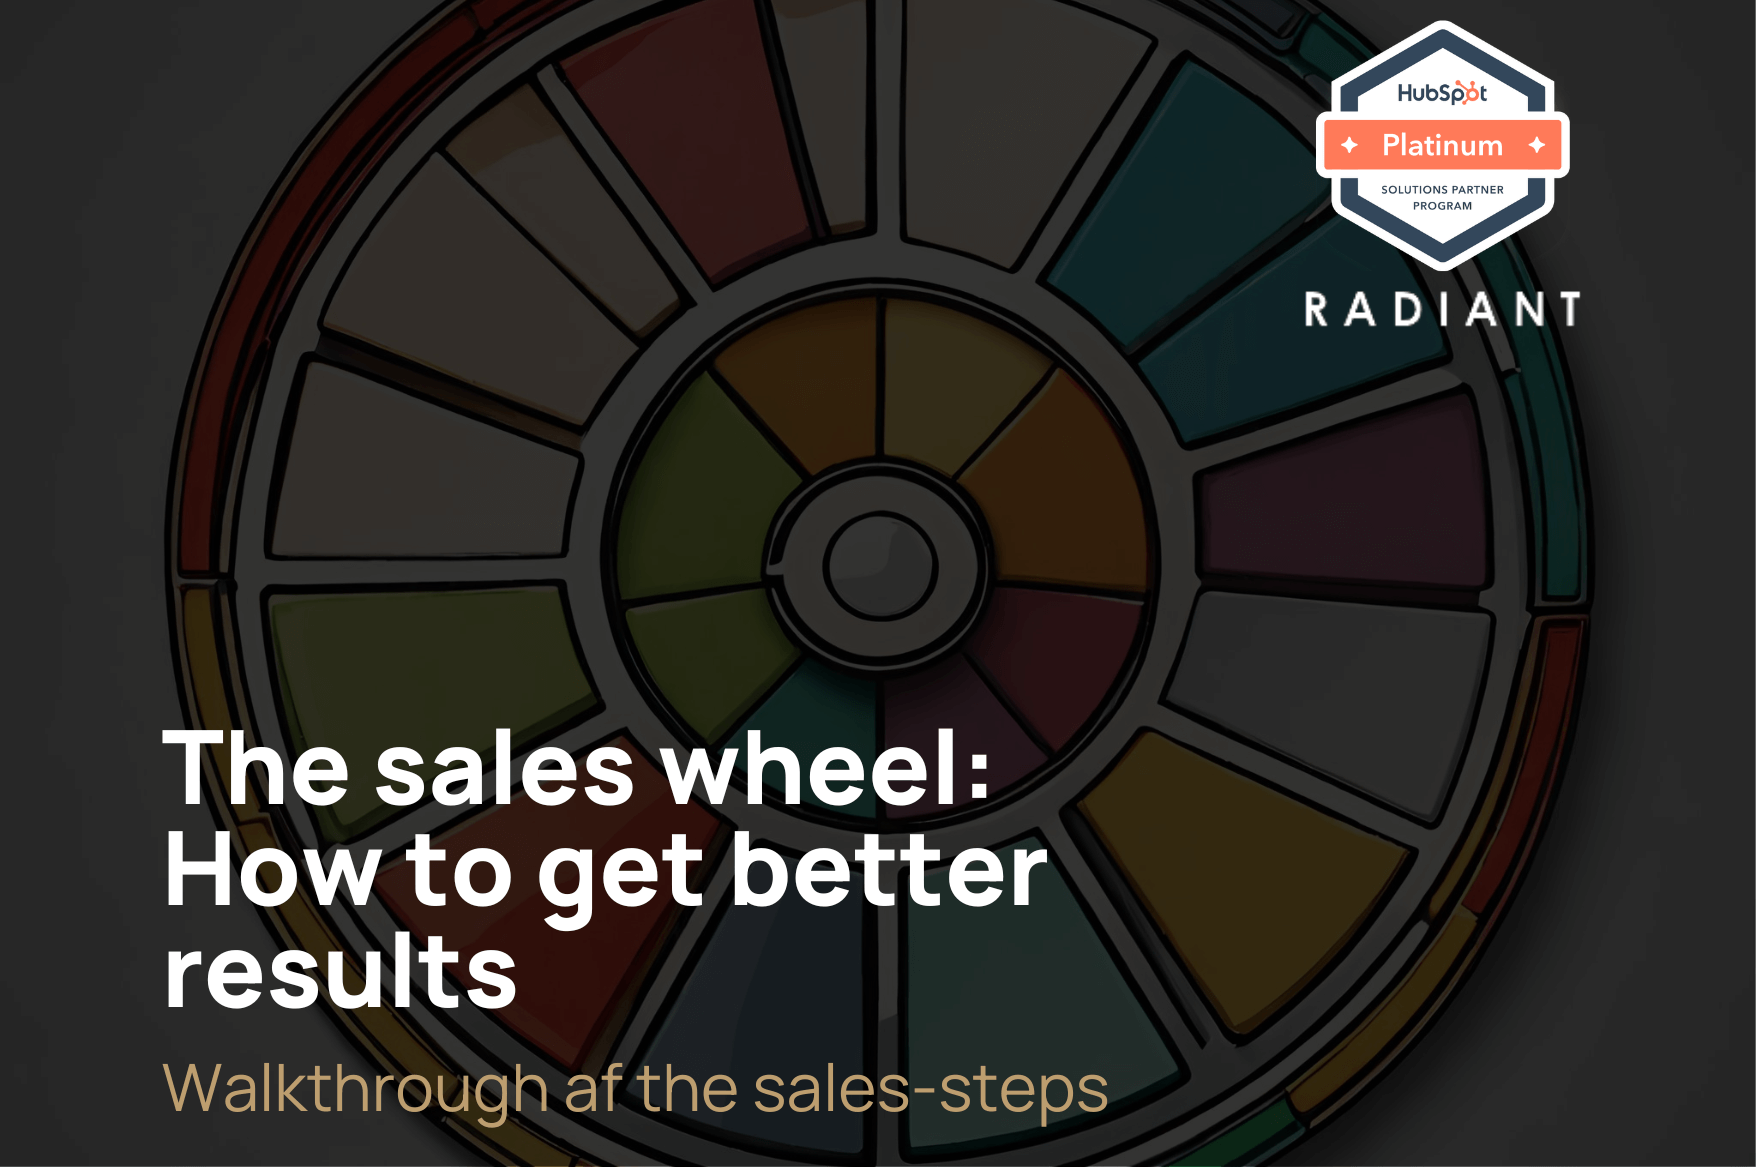 The sales wheel: How to get better results